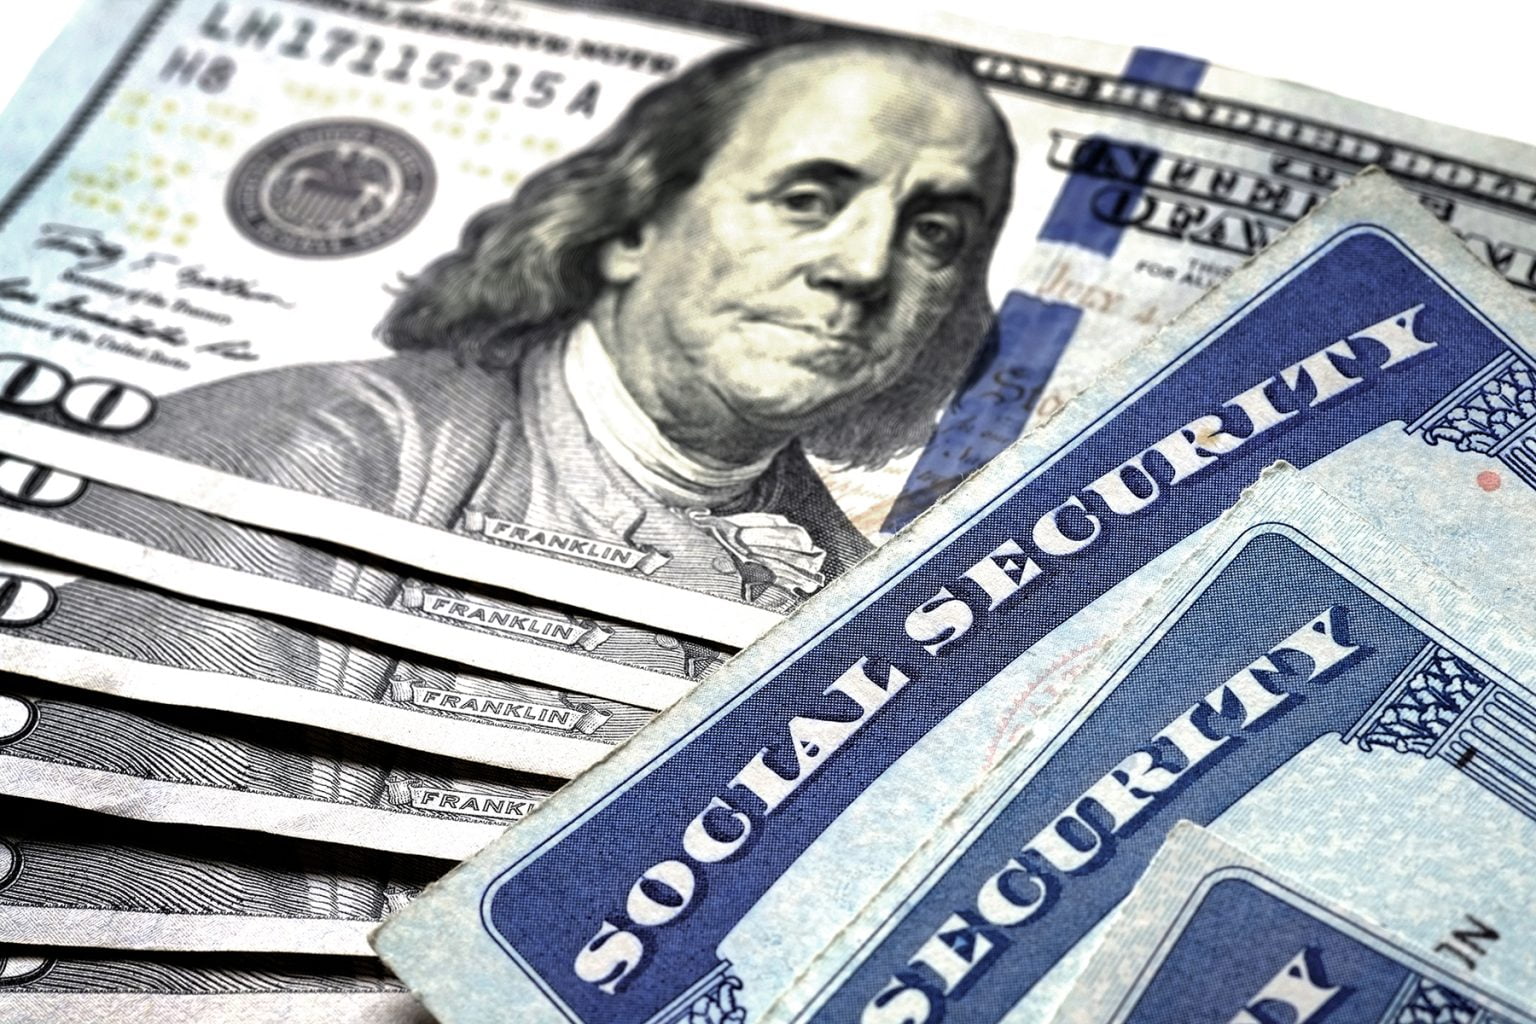 Social Security cards on top of U.S. currency